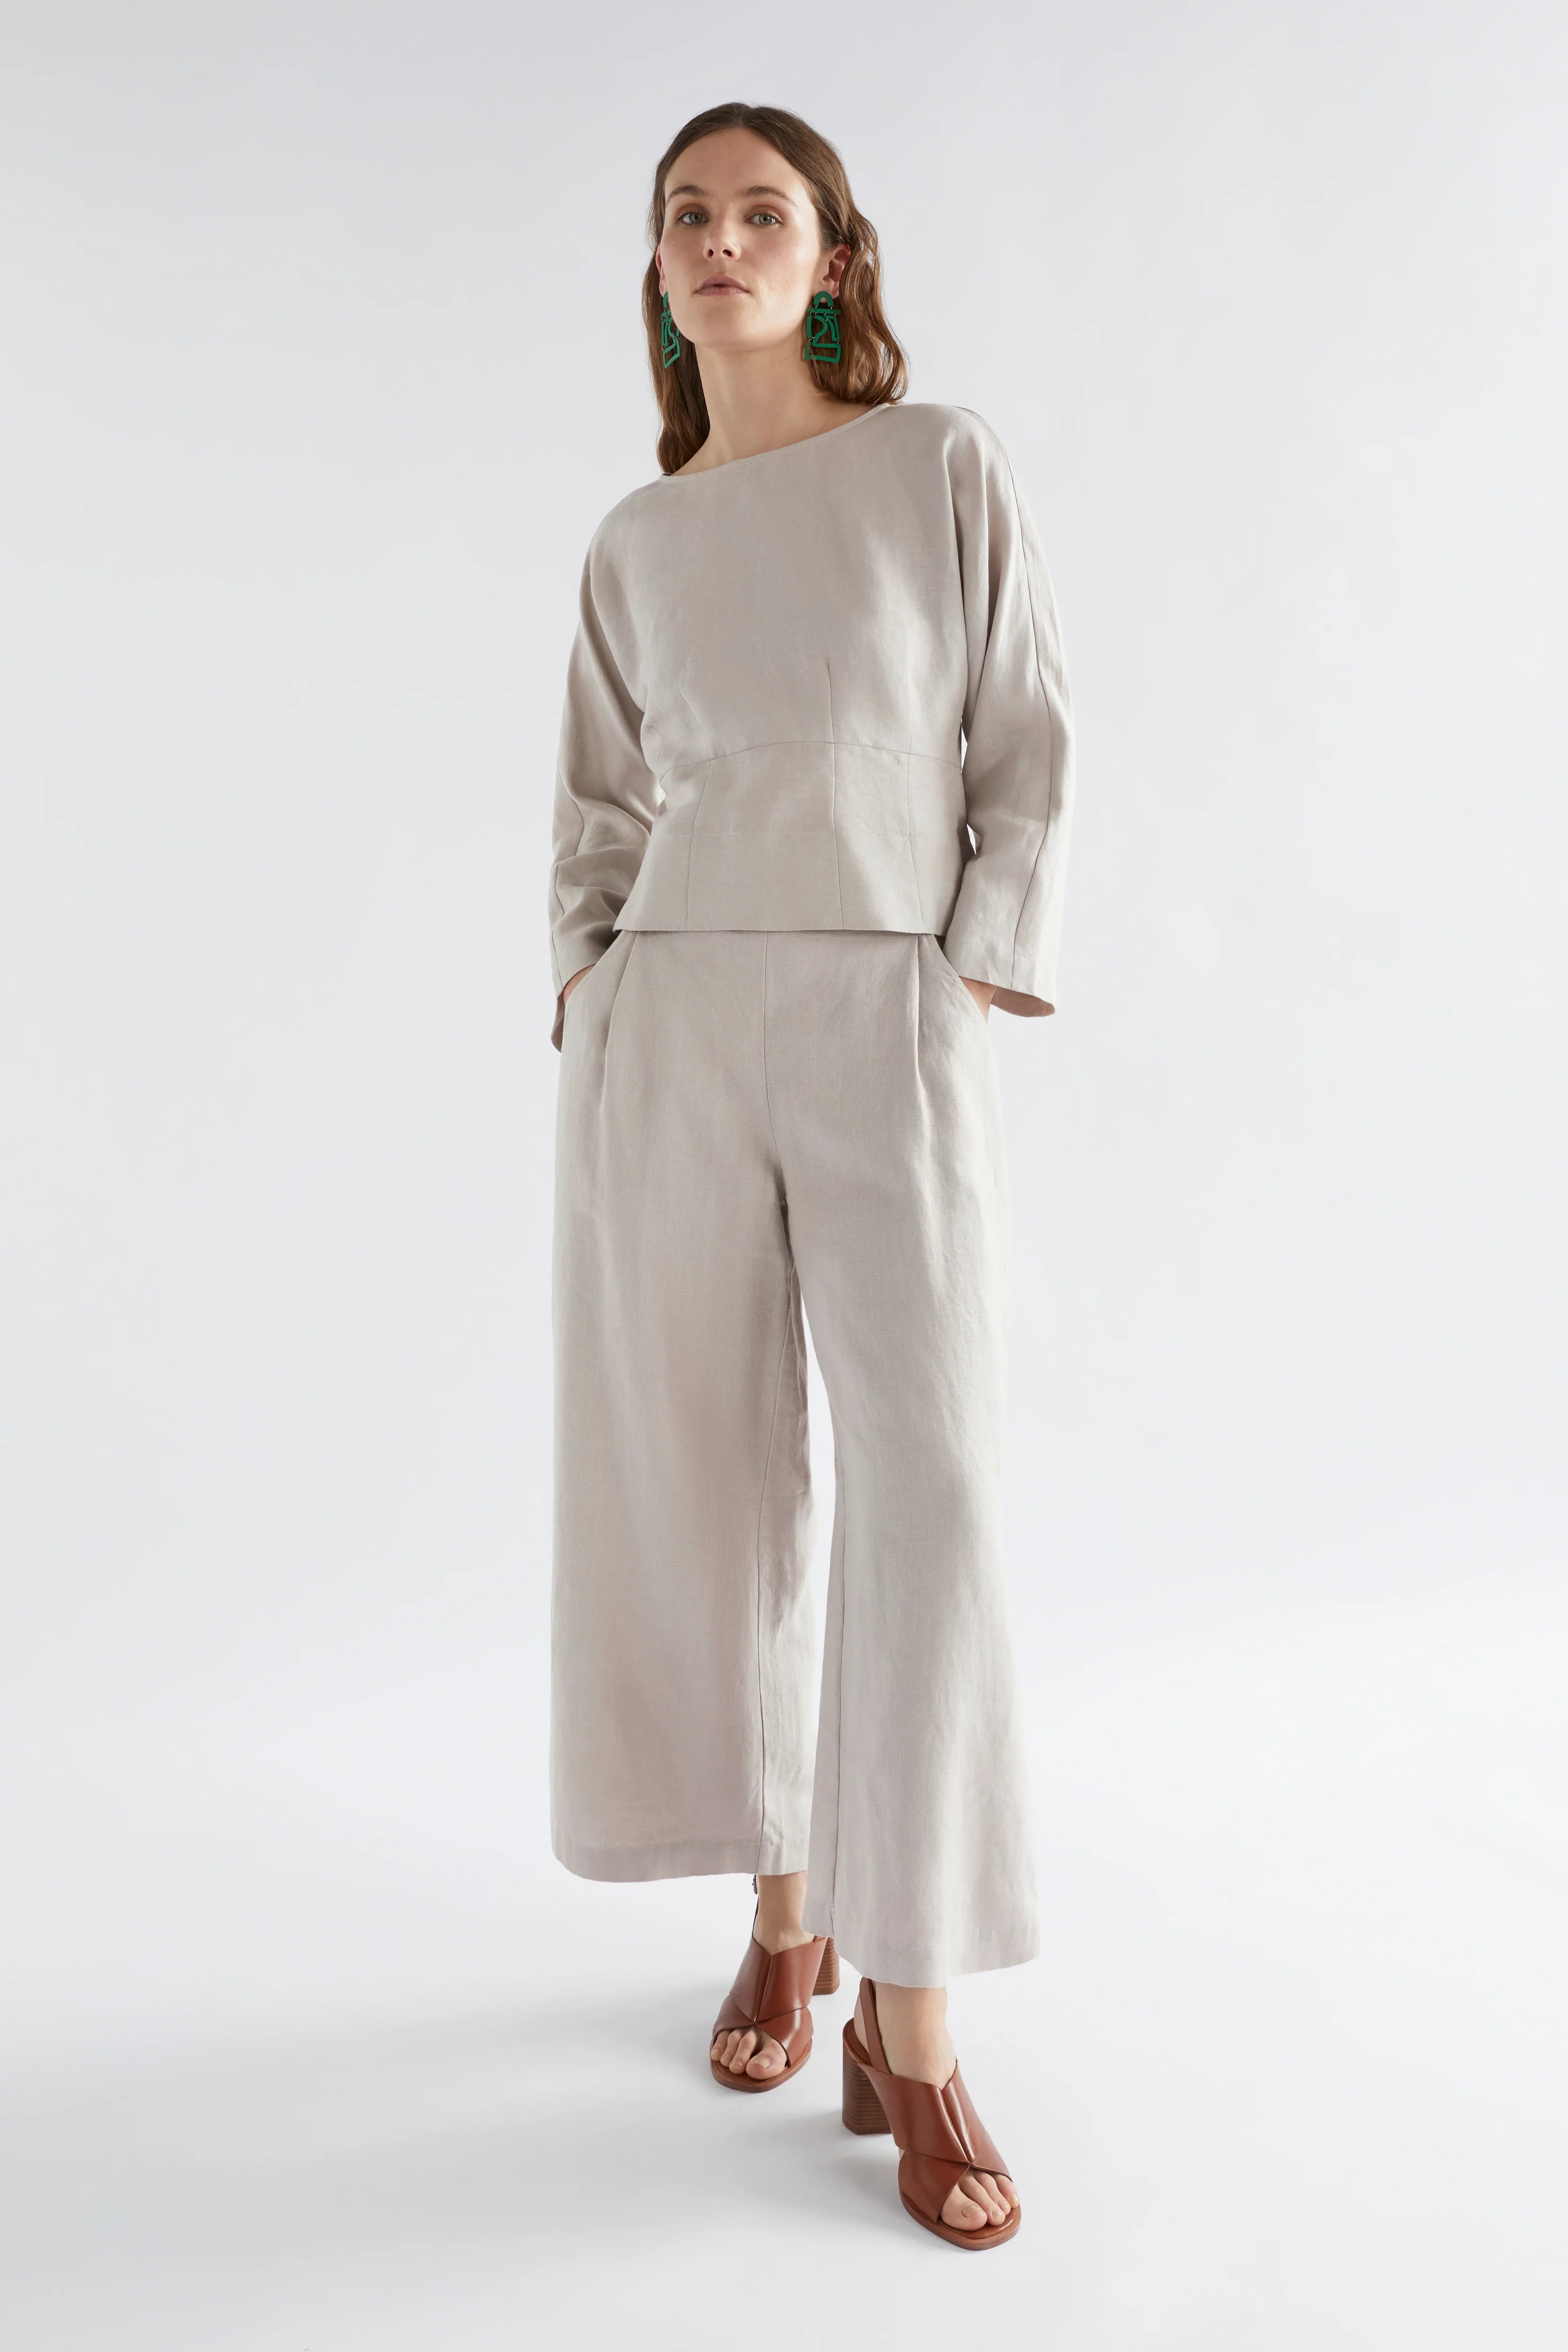 BOBBY | Super Wide Pleated Trousers | Flax Nature | HANSEN Garments